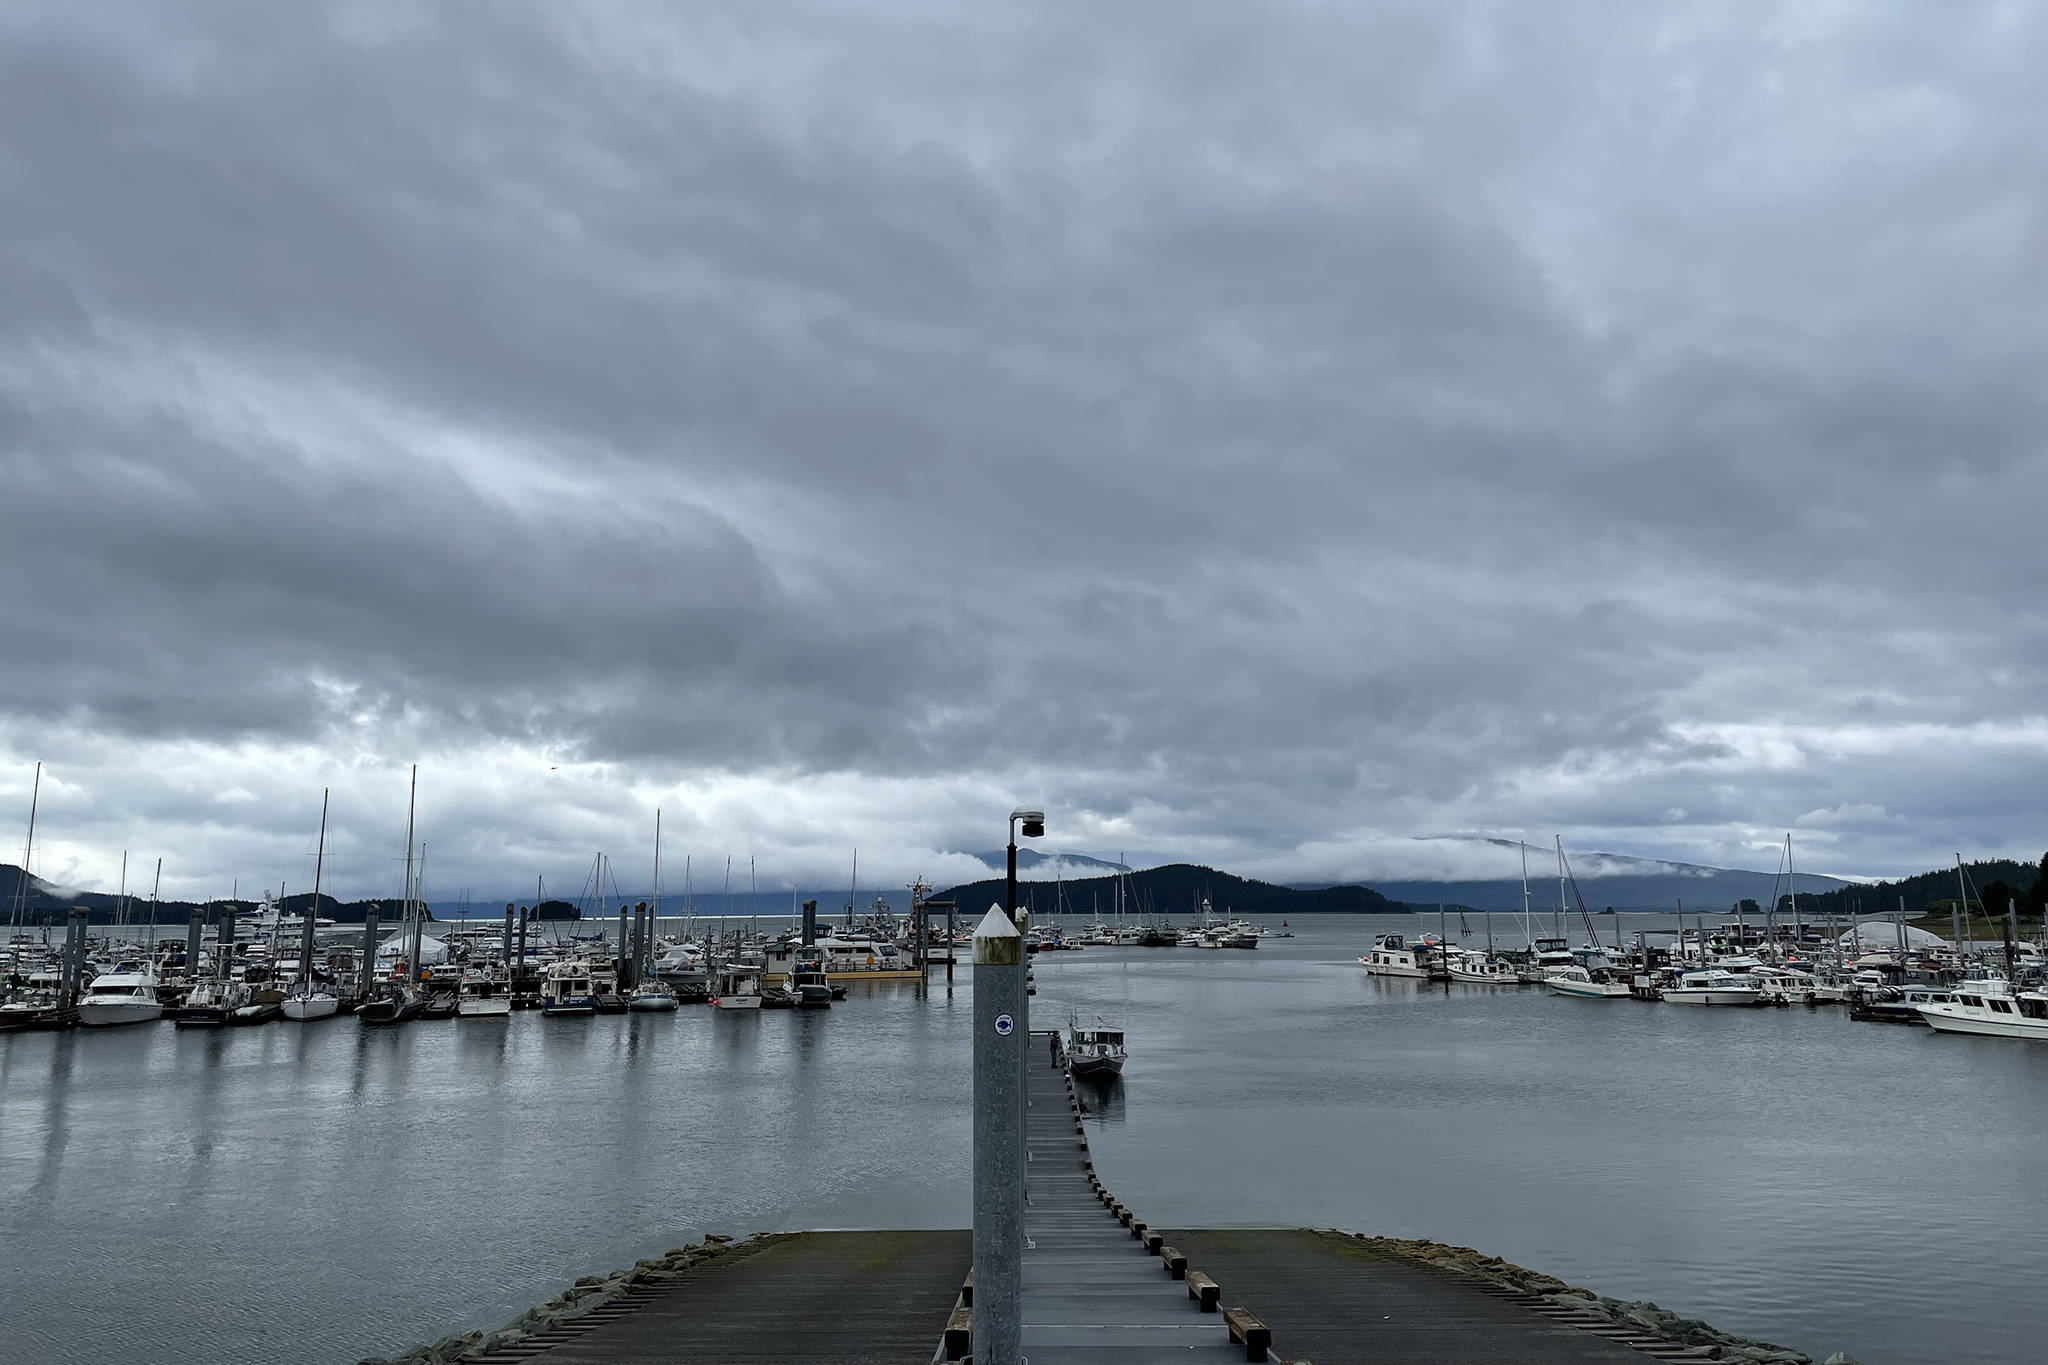 With heavy rains predicted, City and Borough of Juneau Docks and Harbors asked boat owners to check on their vessels. The National Weather Service issued a flood warning in light of the expected weather. (Michael S. Lockett / Juneau Empire)